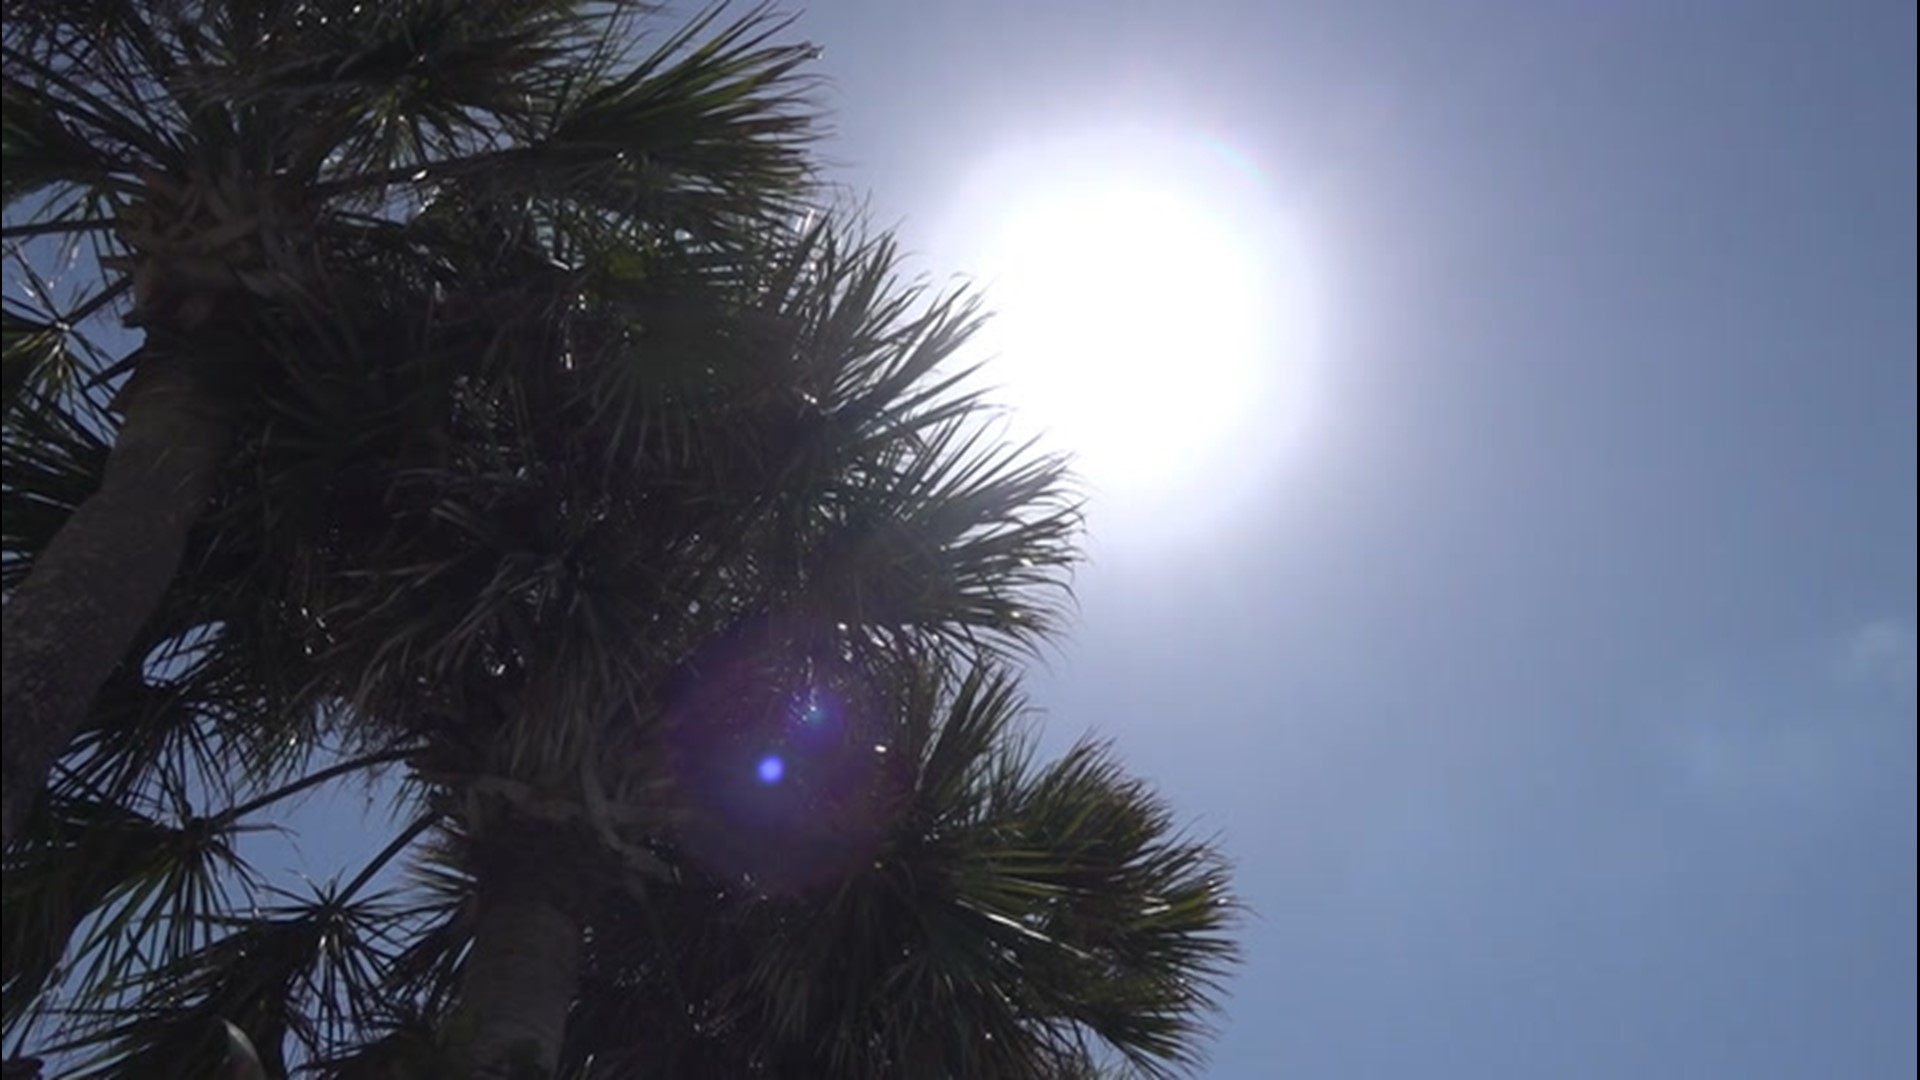 Summerlike temperatures coming to Florida could be more dangerous because of closures caused by concerns over COVID-19 according to meteorologists.